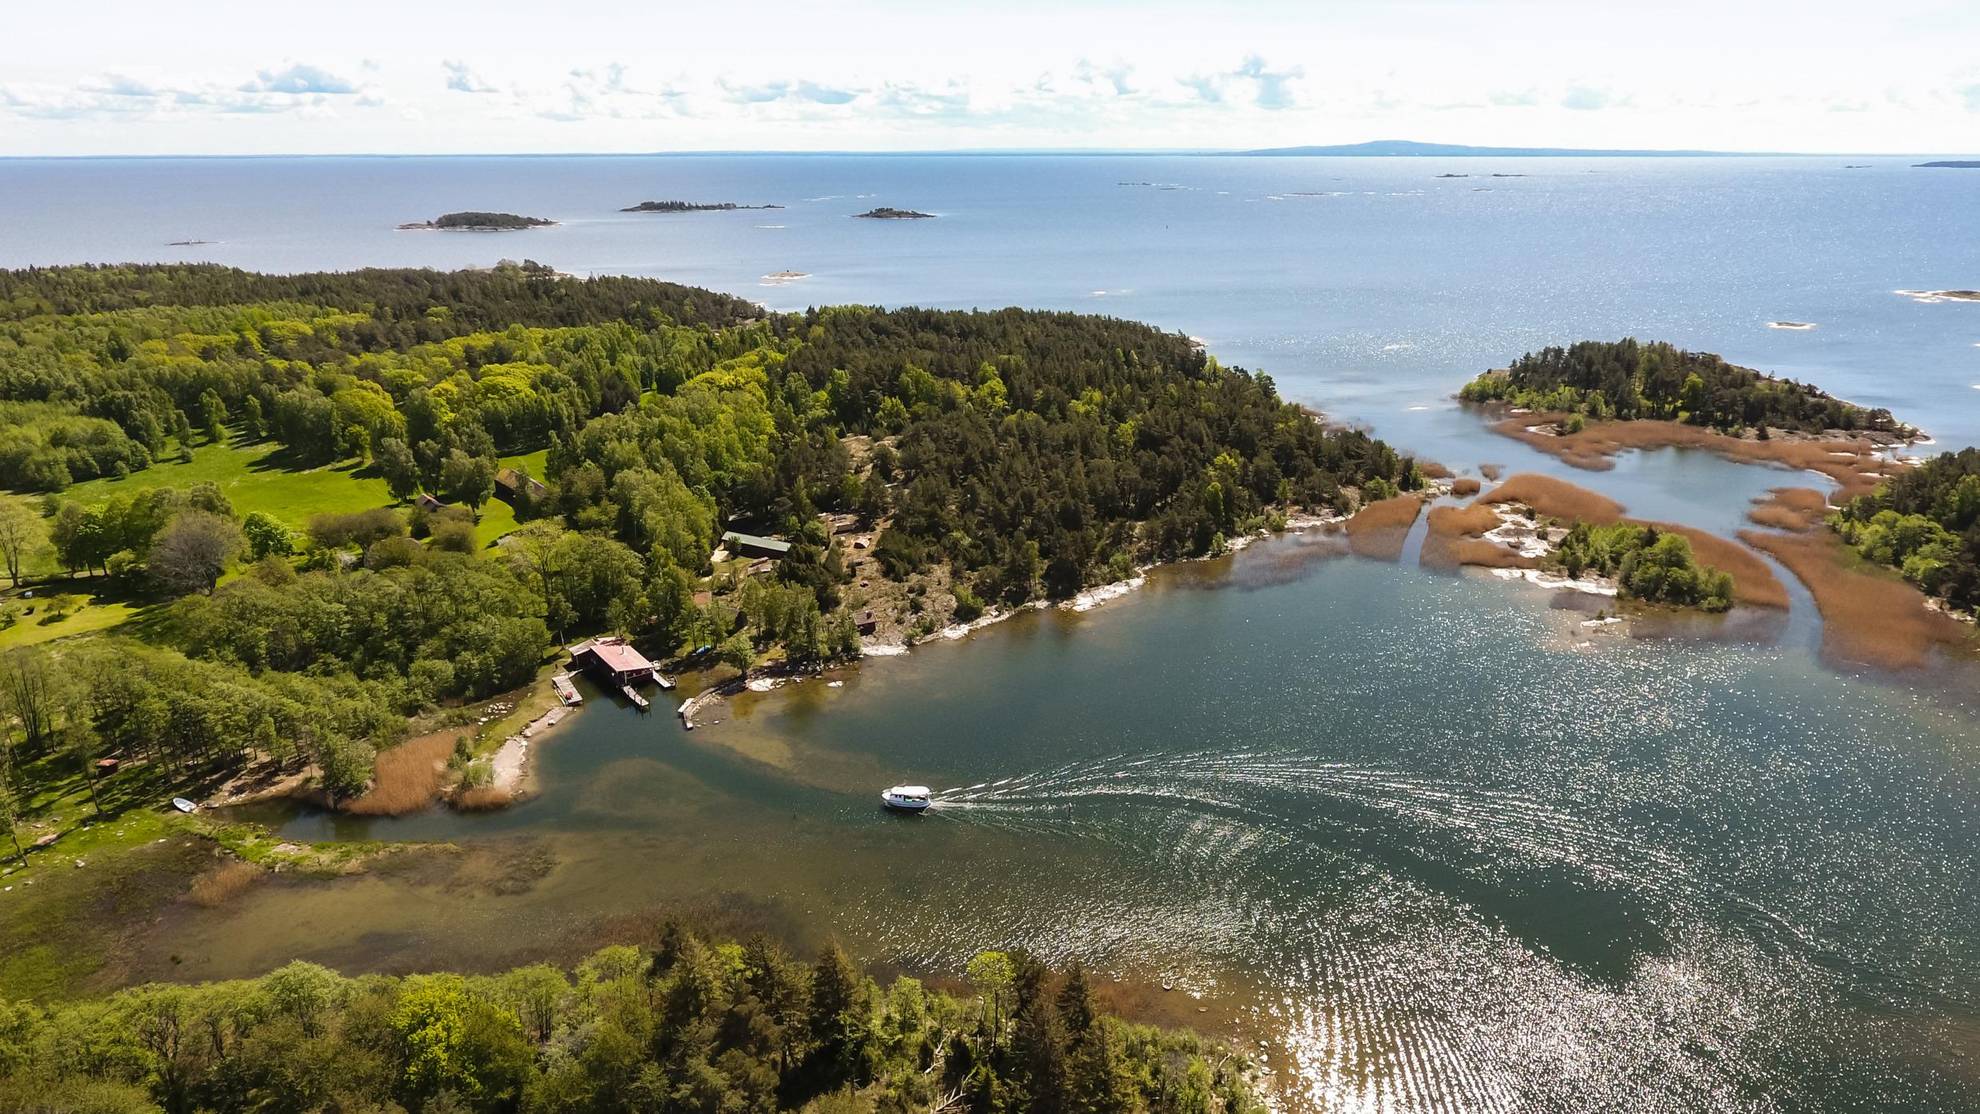 An aerial view of a archipelago in the lake Vänern during summer.